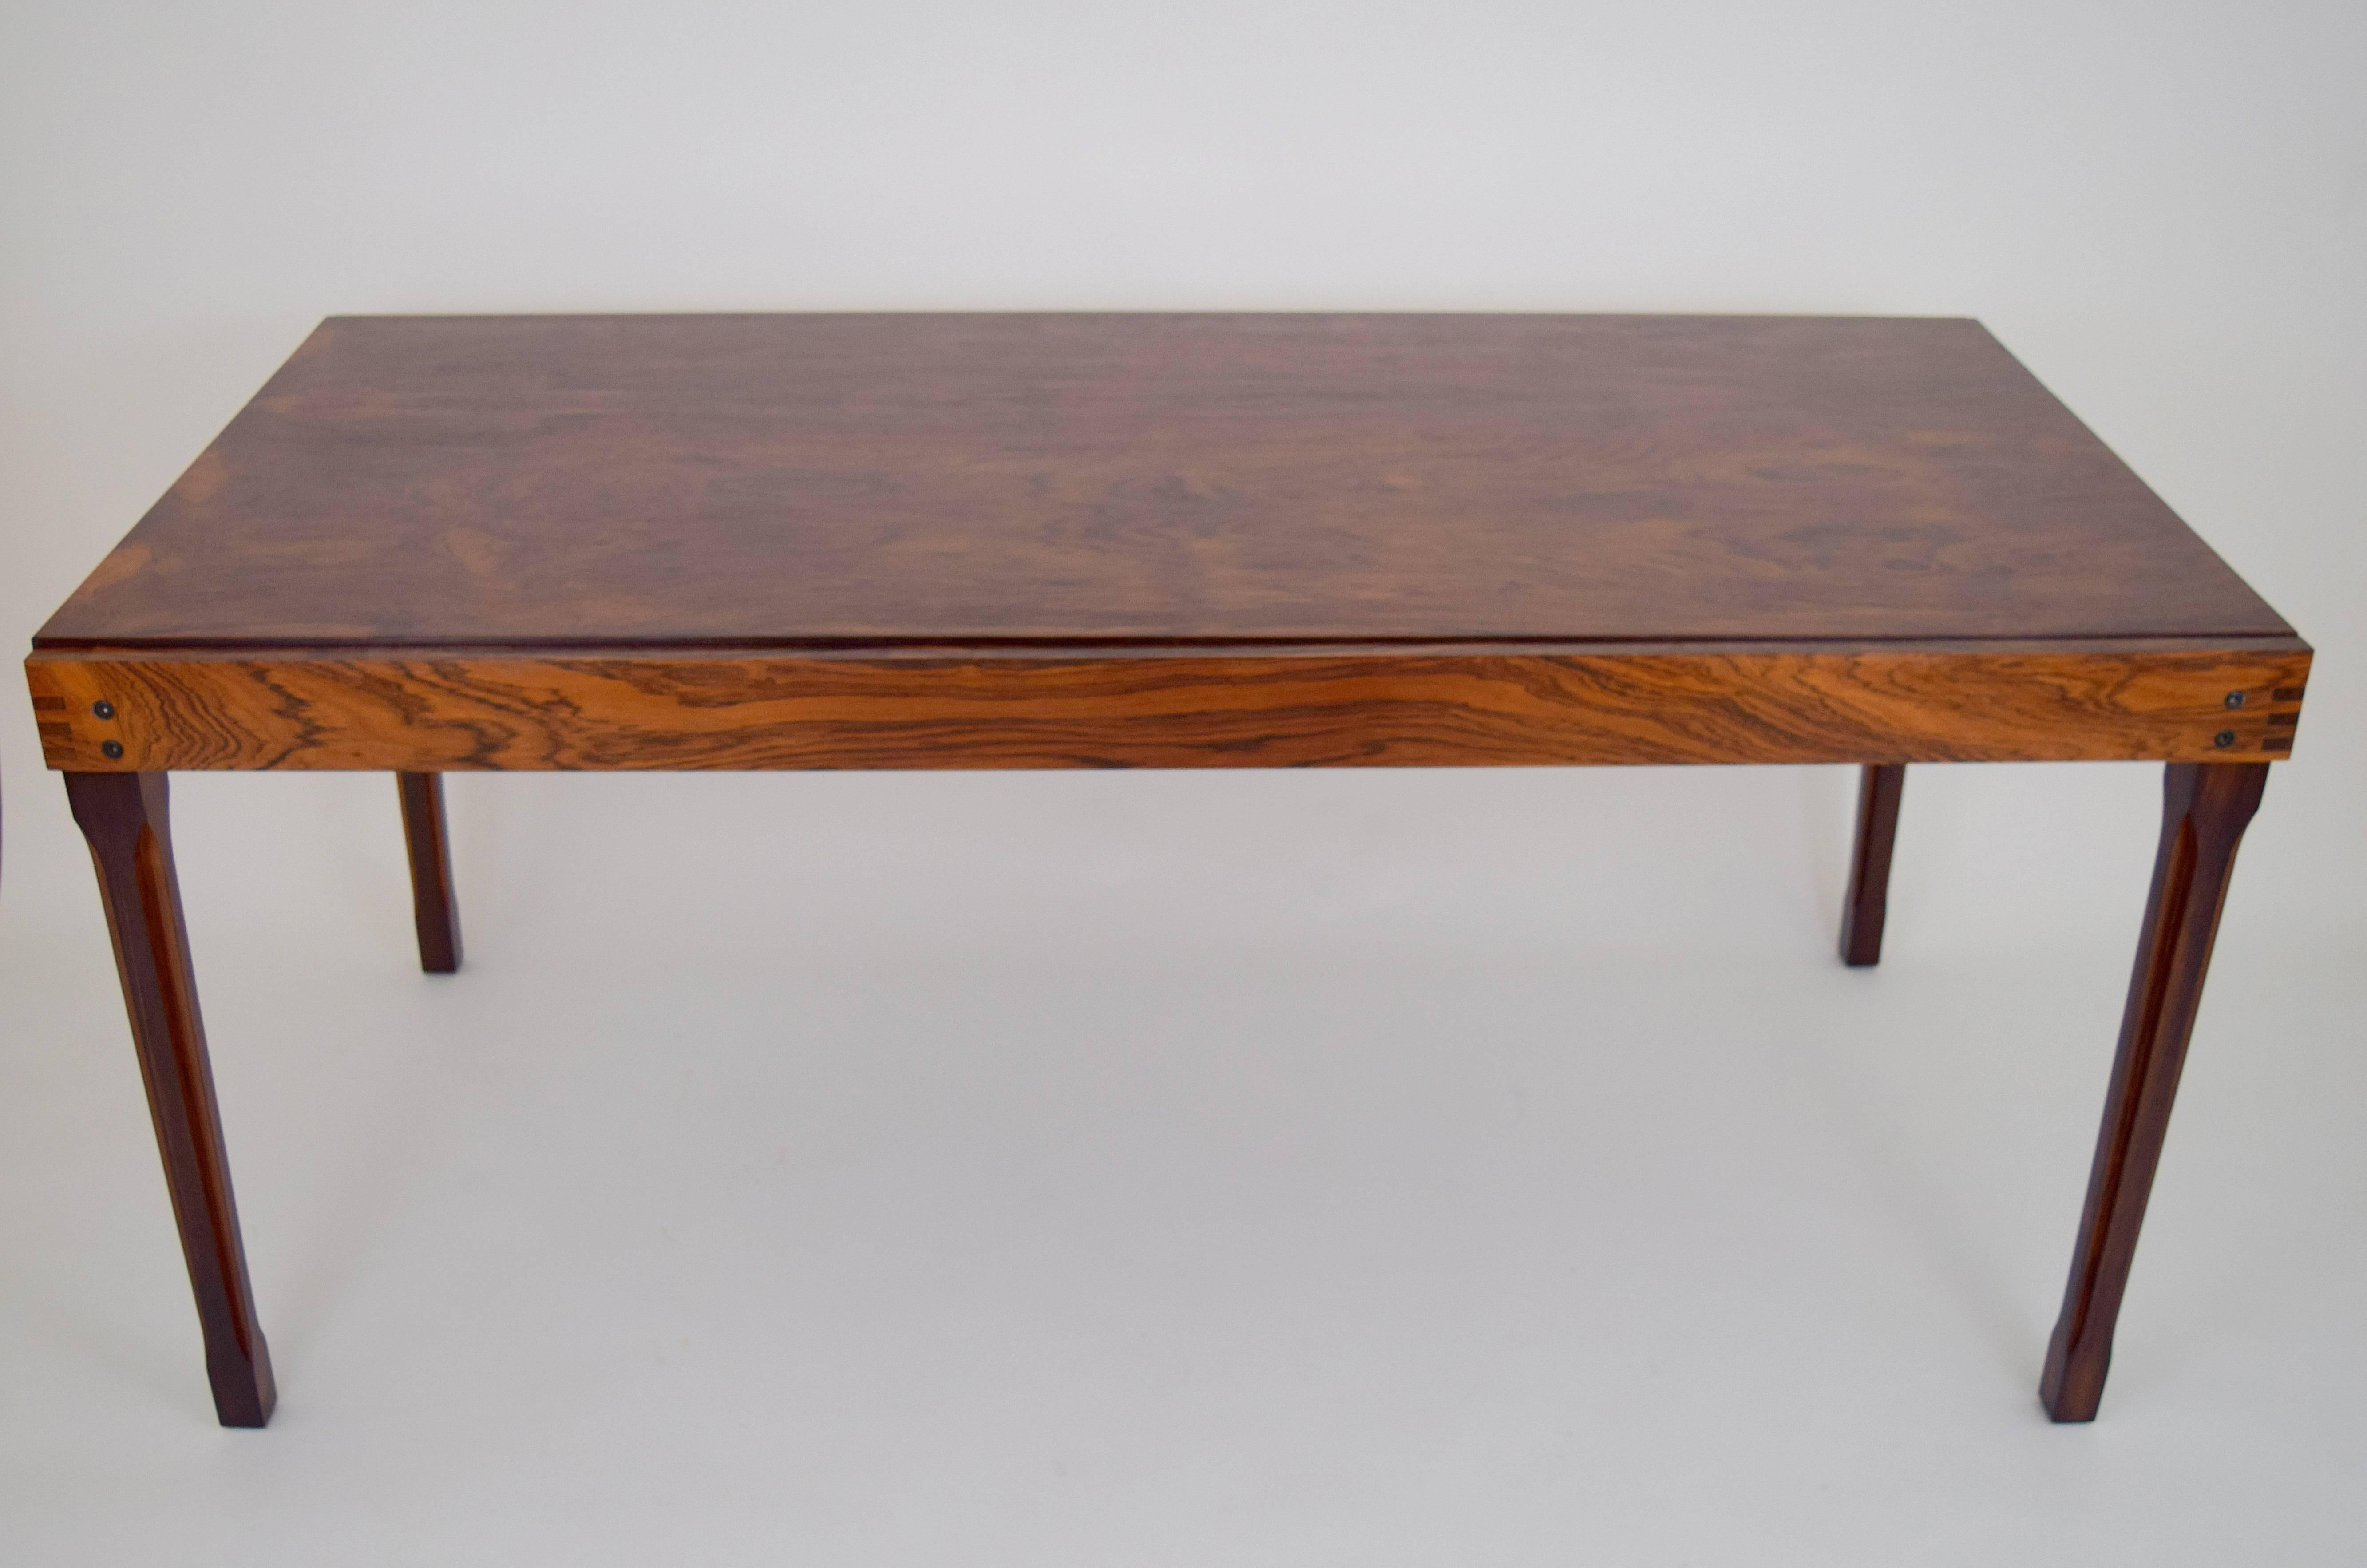 Rare Ico Parisi for M.I.M. rosewood expanding table. Sliding rectangular top reveals self stowed rotating extending leaf with delicate rosewood pull. Fluted leg details elegantly offset by apron finger joint corners. Lovely grain throughout, with